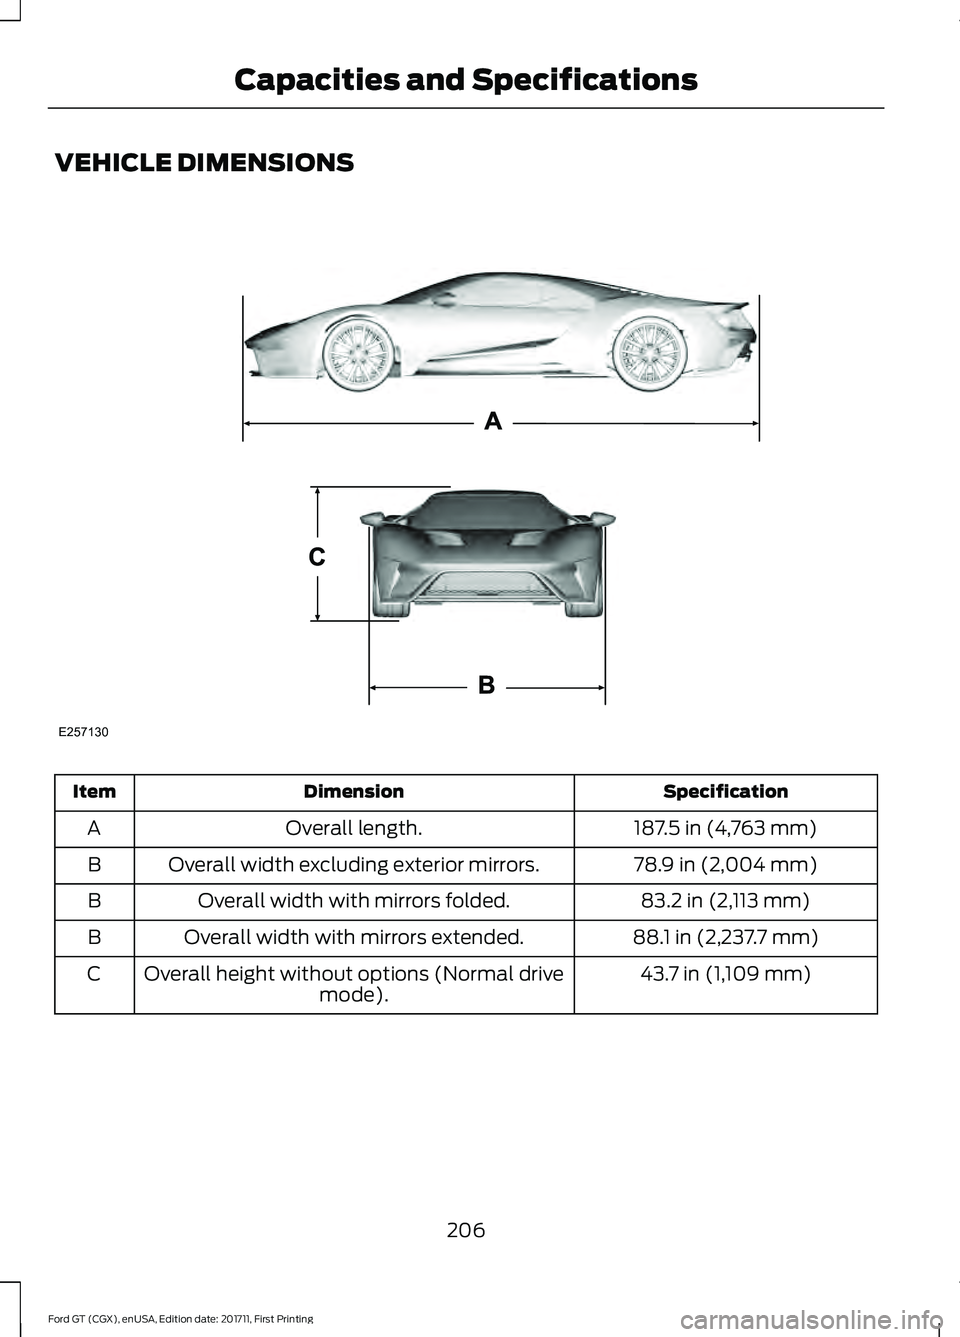 FORD GT 2018  Owners Manual VEHICLE DIMENSIONS
Specification
Dimension
Item
187.5 in (4,763 mm)
Overall length.
A
78.9 in (2,004 mm)
Overall width excluding exterior mirrors.
B
83.2 in (2,113 mm)
Overall width with mirrors folde